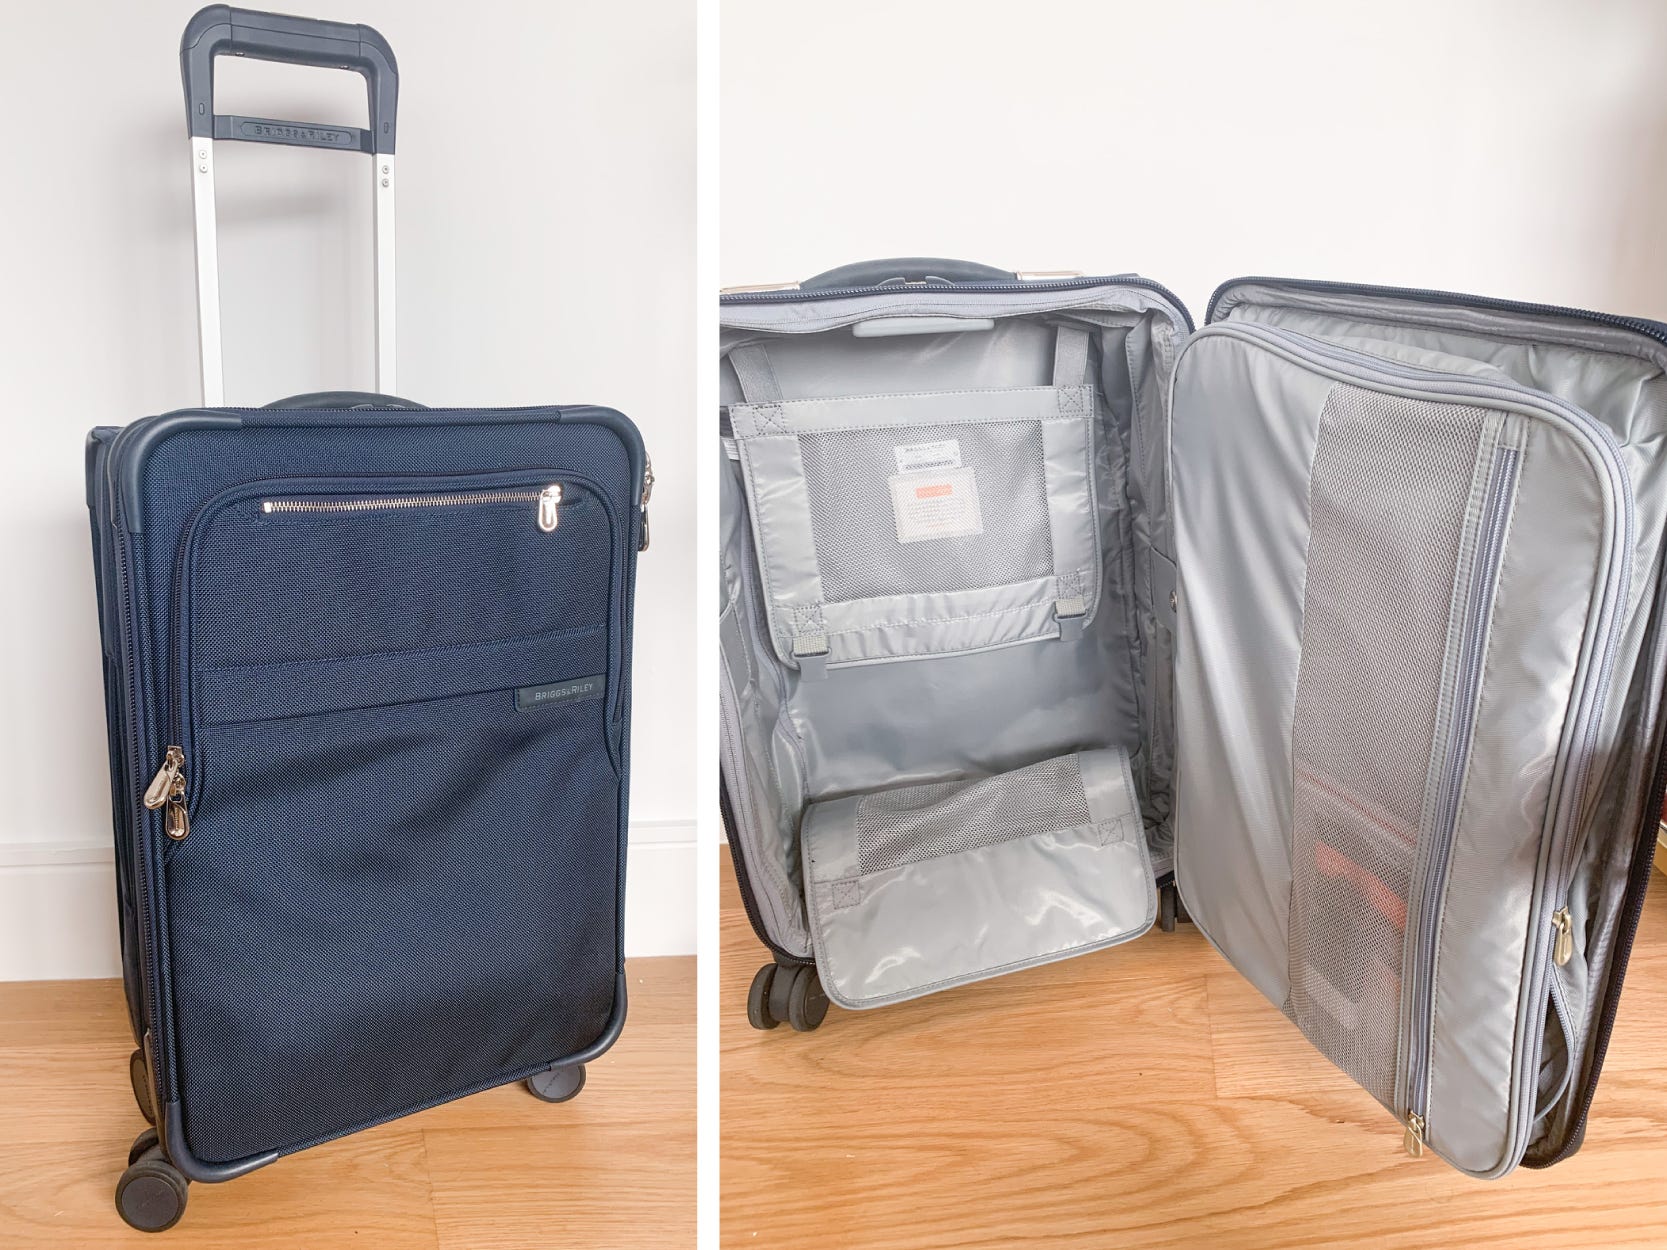 Best carry-on luggage - briggs & riley side by side